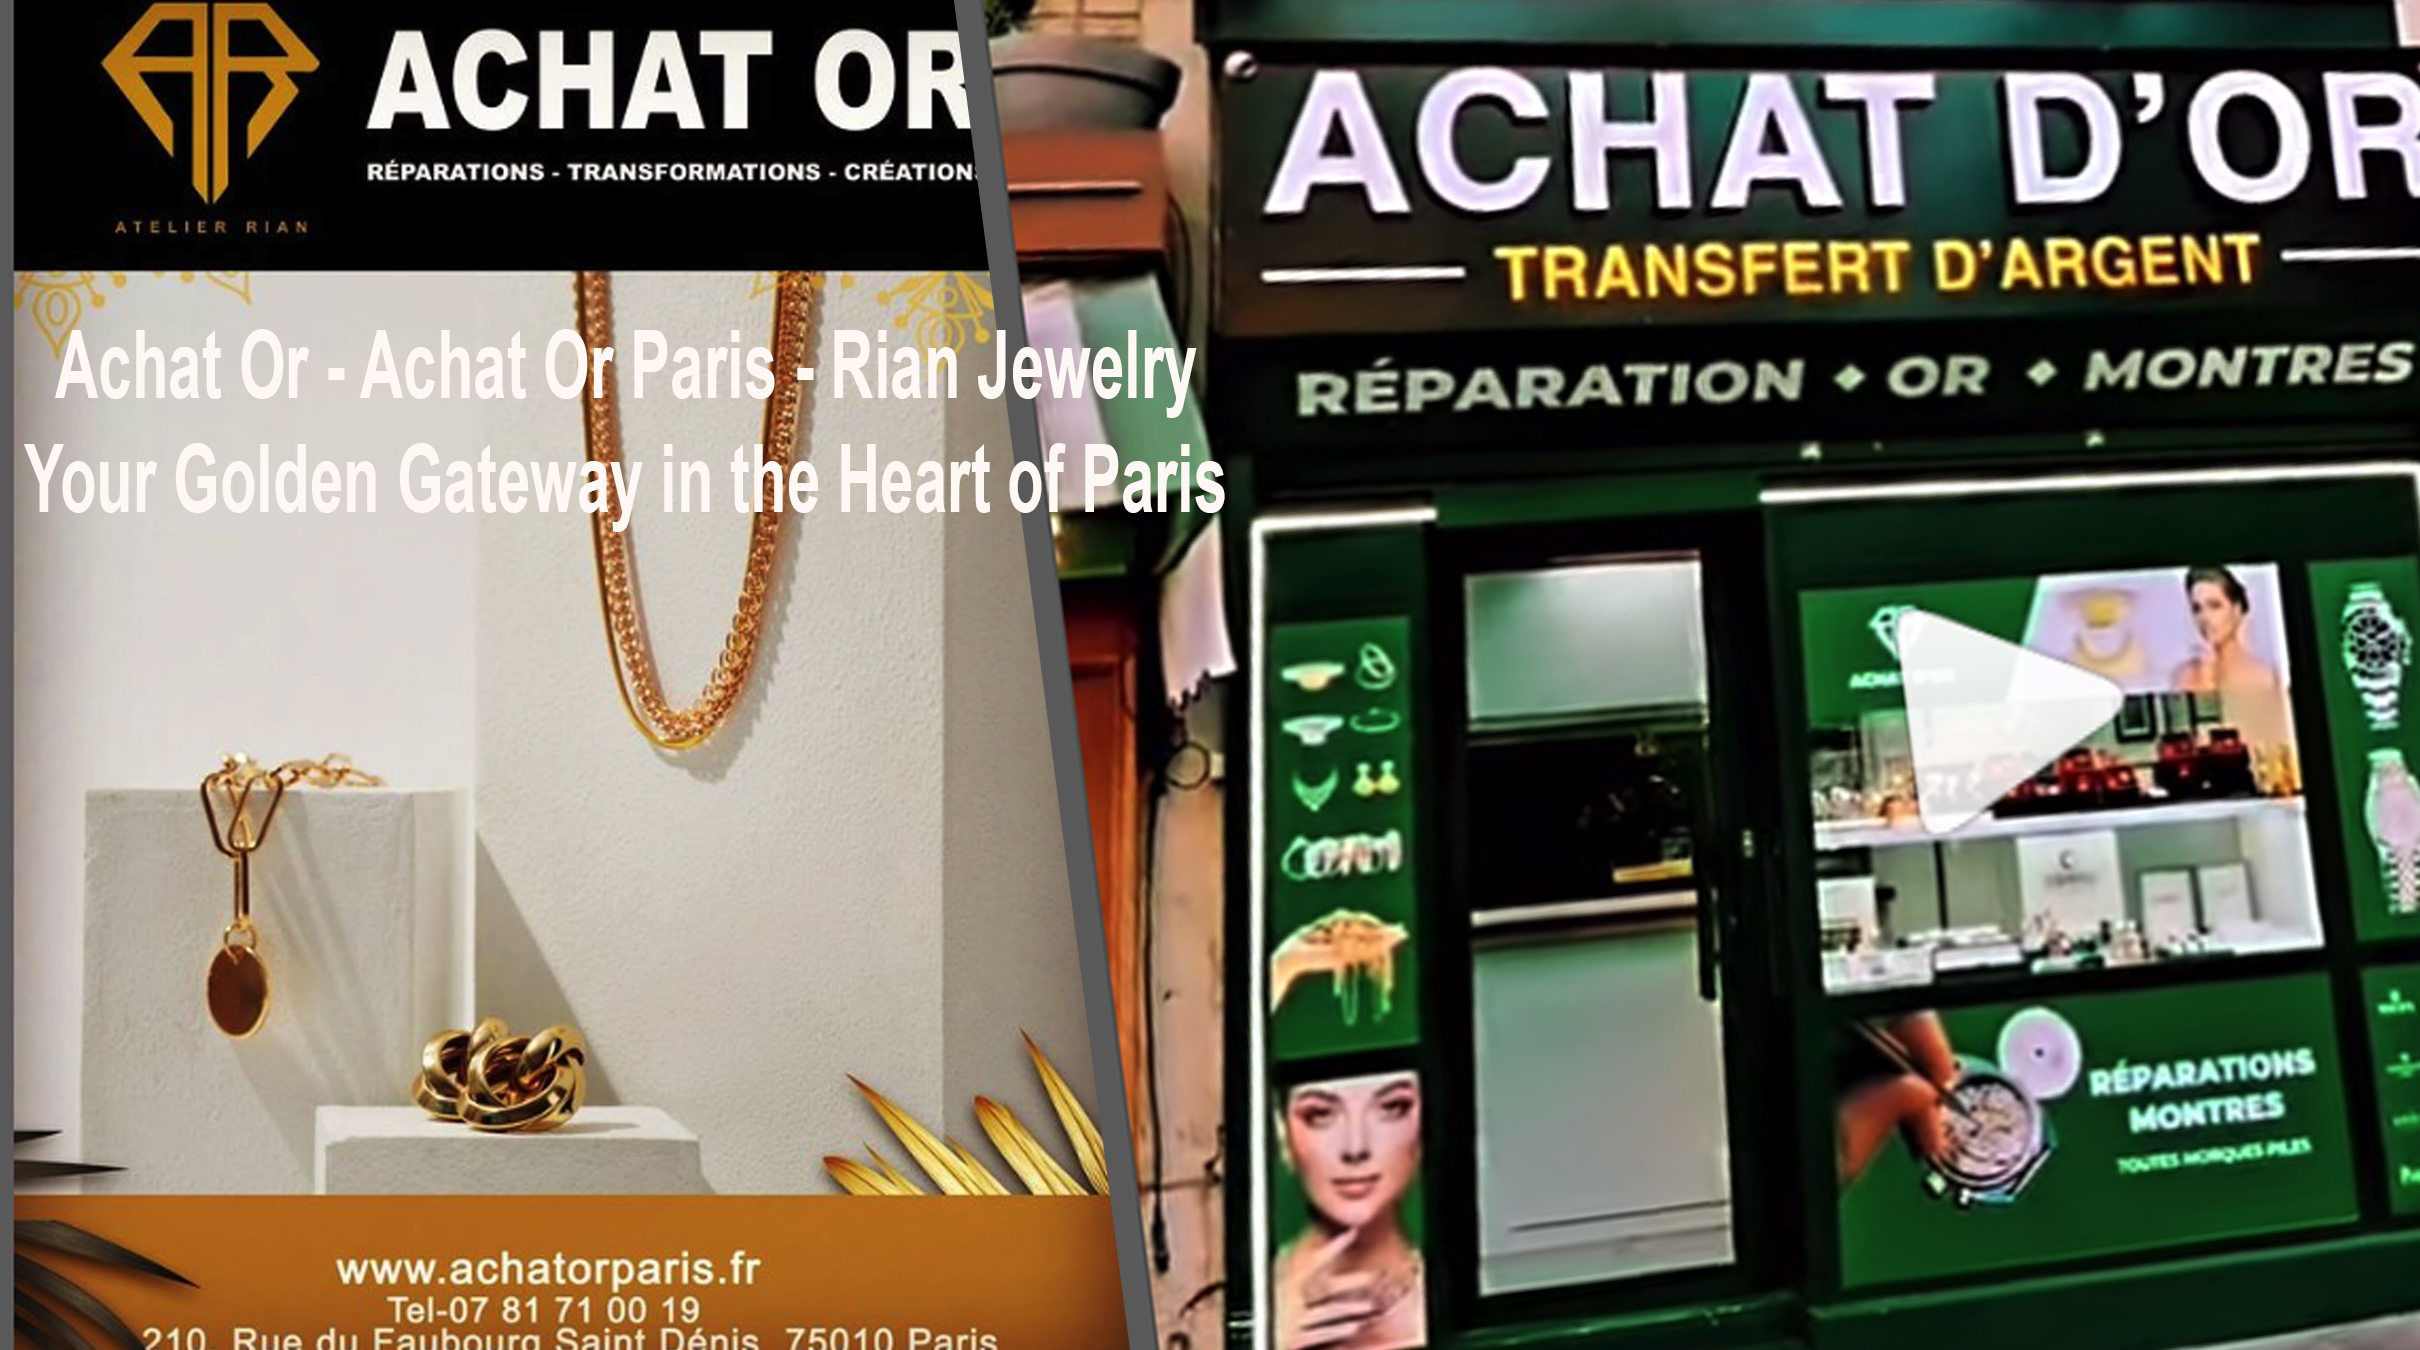 ACHAT-OR-PARIS-ACHAT-OR-PARIS-10--BIJOUTERIE-RIAN-Rian-Jewelry-Diamond-House-Your-Golden-Gateway-in-the-Heart-of-Paris-DN-AFRICA-Media-Partner